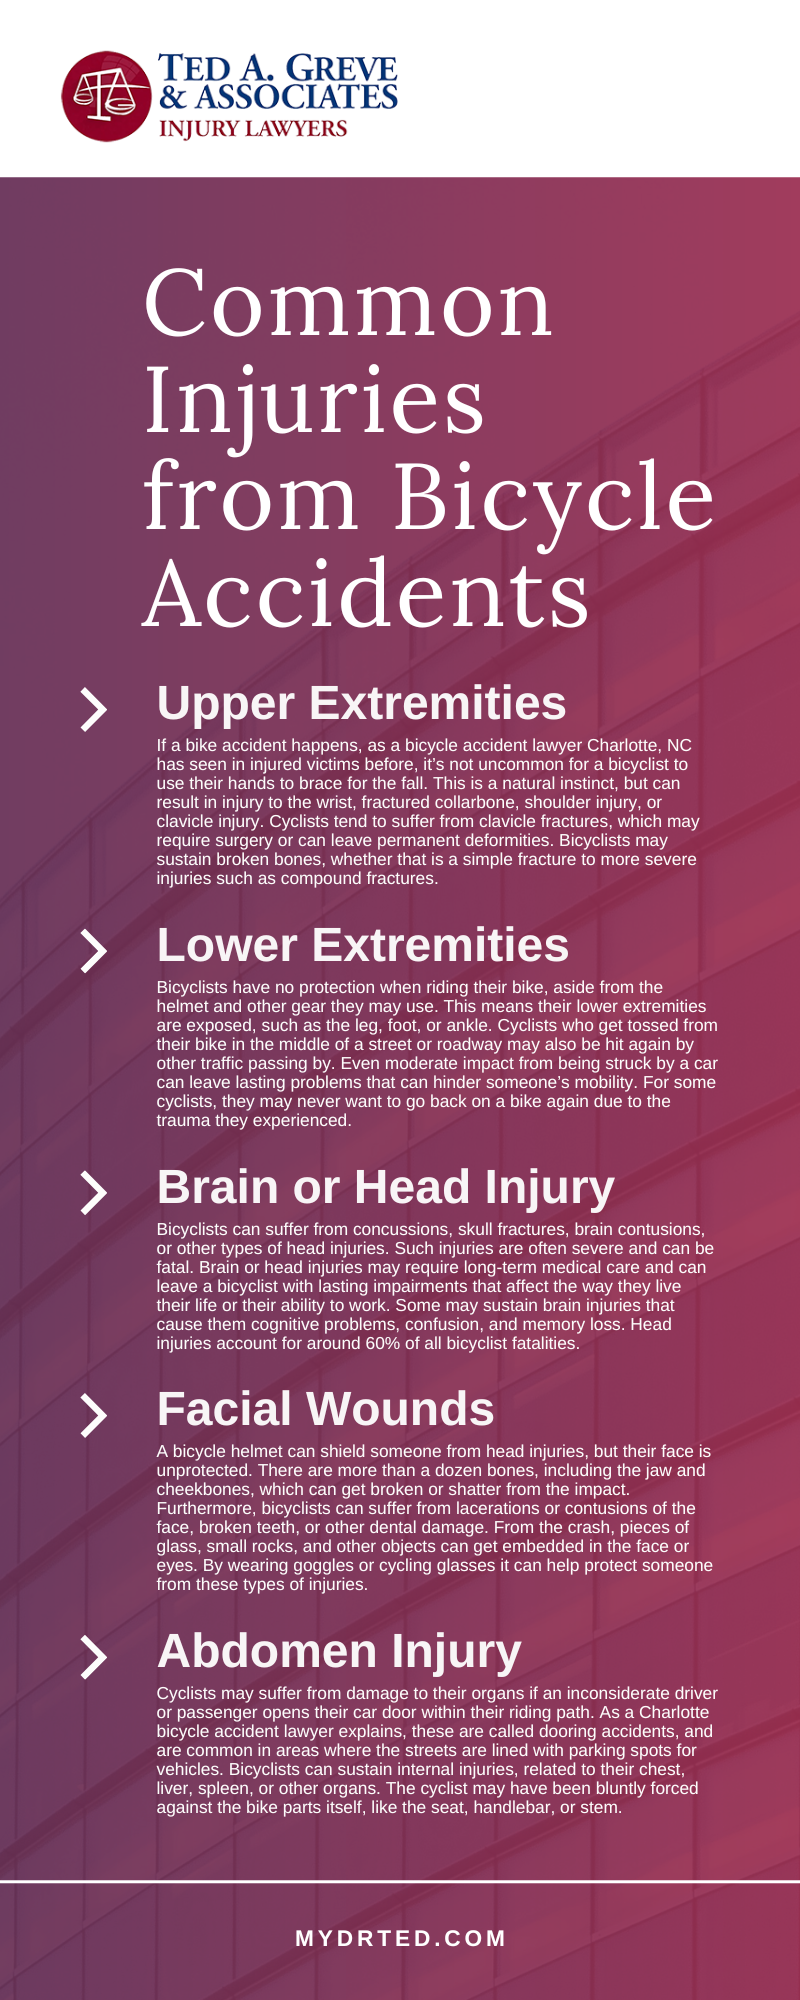 Common Injuries from Bicycle Accidents Infographic